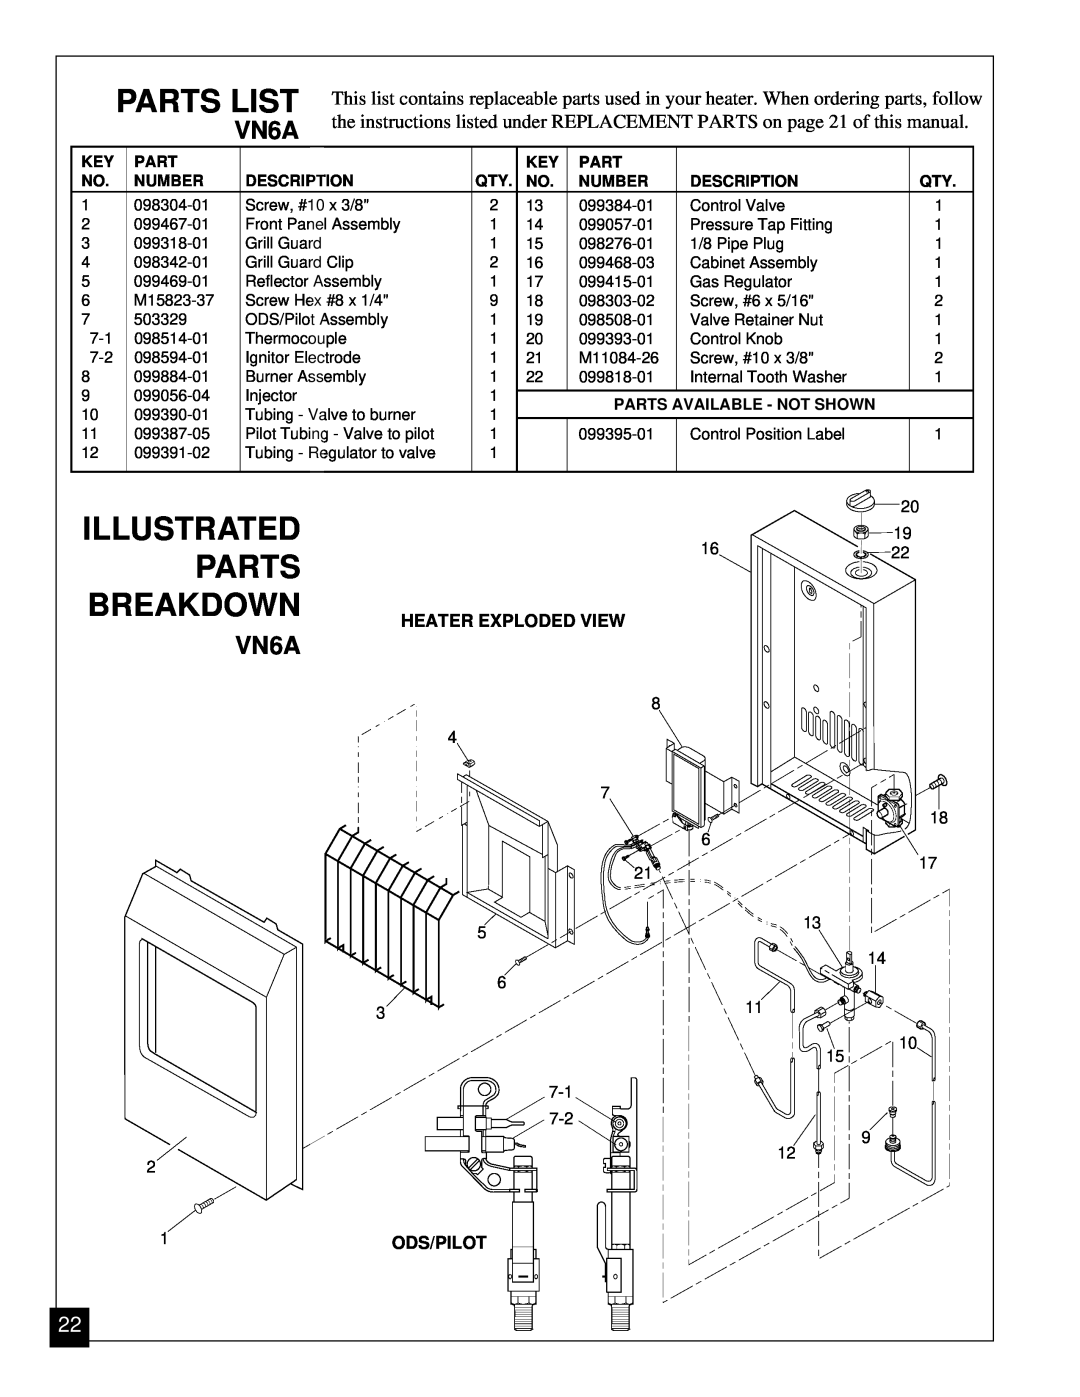 Vanguard Heating VN6A, VN12 installation manual Parts List, Number, Description, Qty. No, Parts Available - Not Shown 